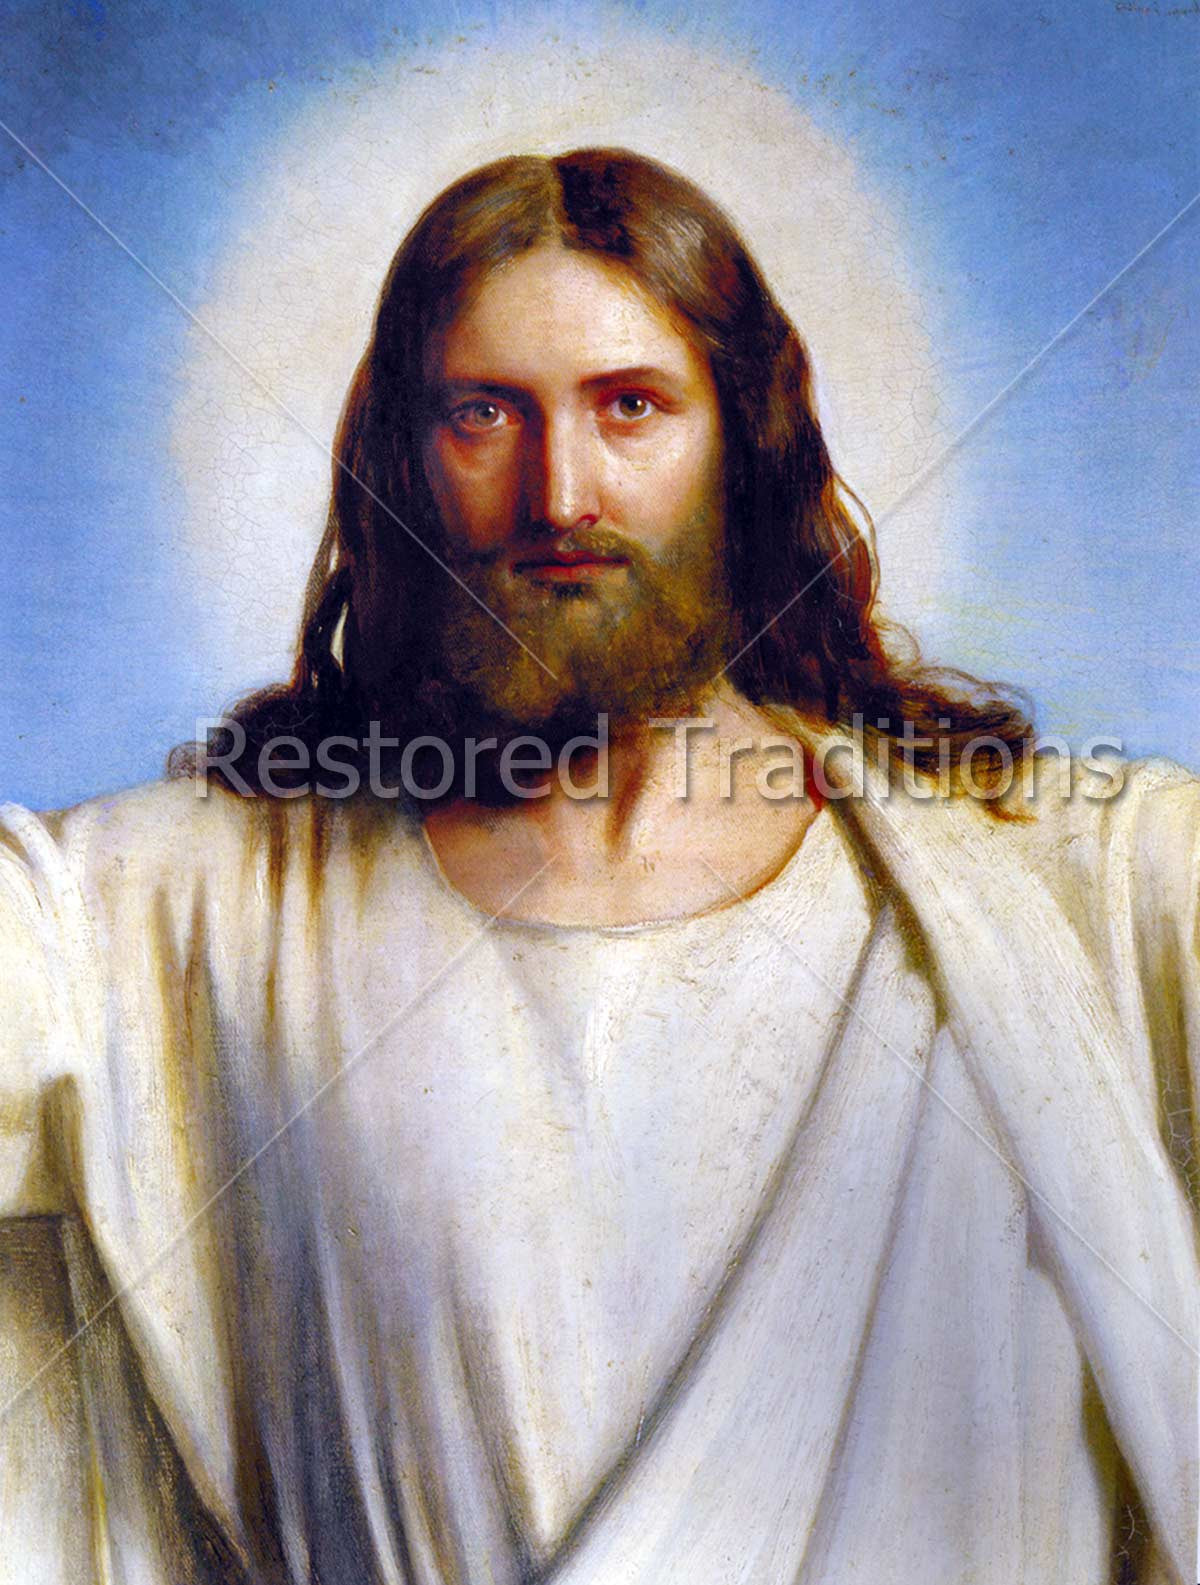 A Portrait of Jesus Christ as the Consoler of Mankind | Stock Art ...